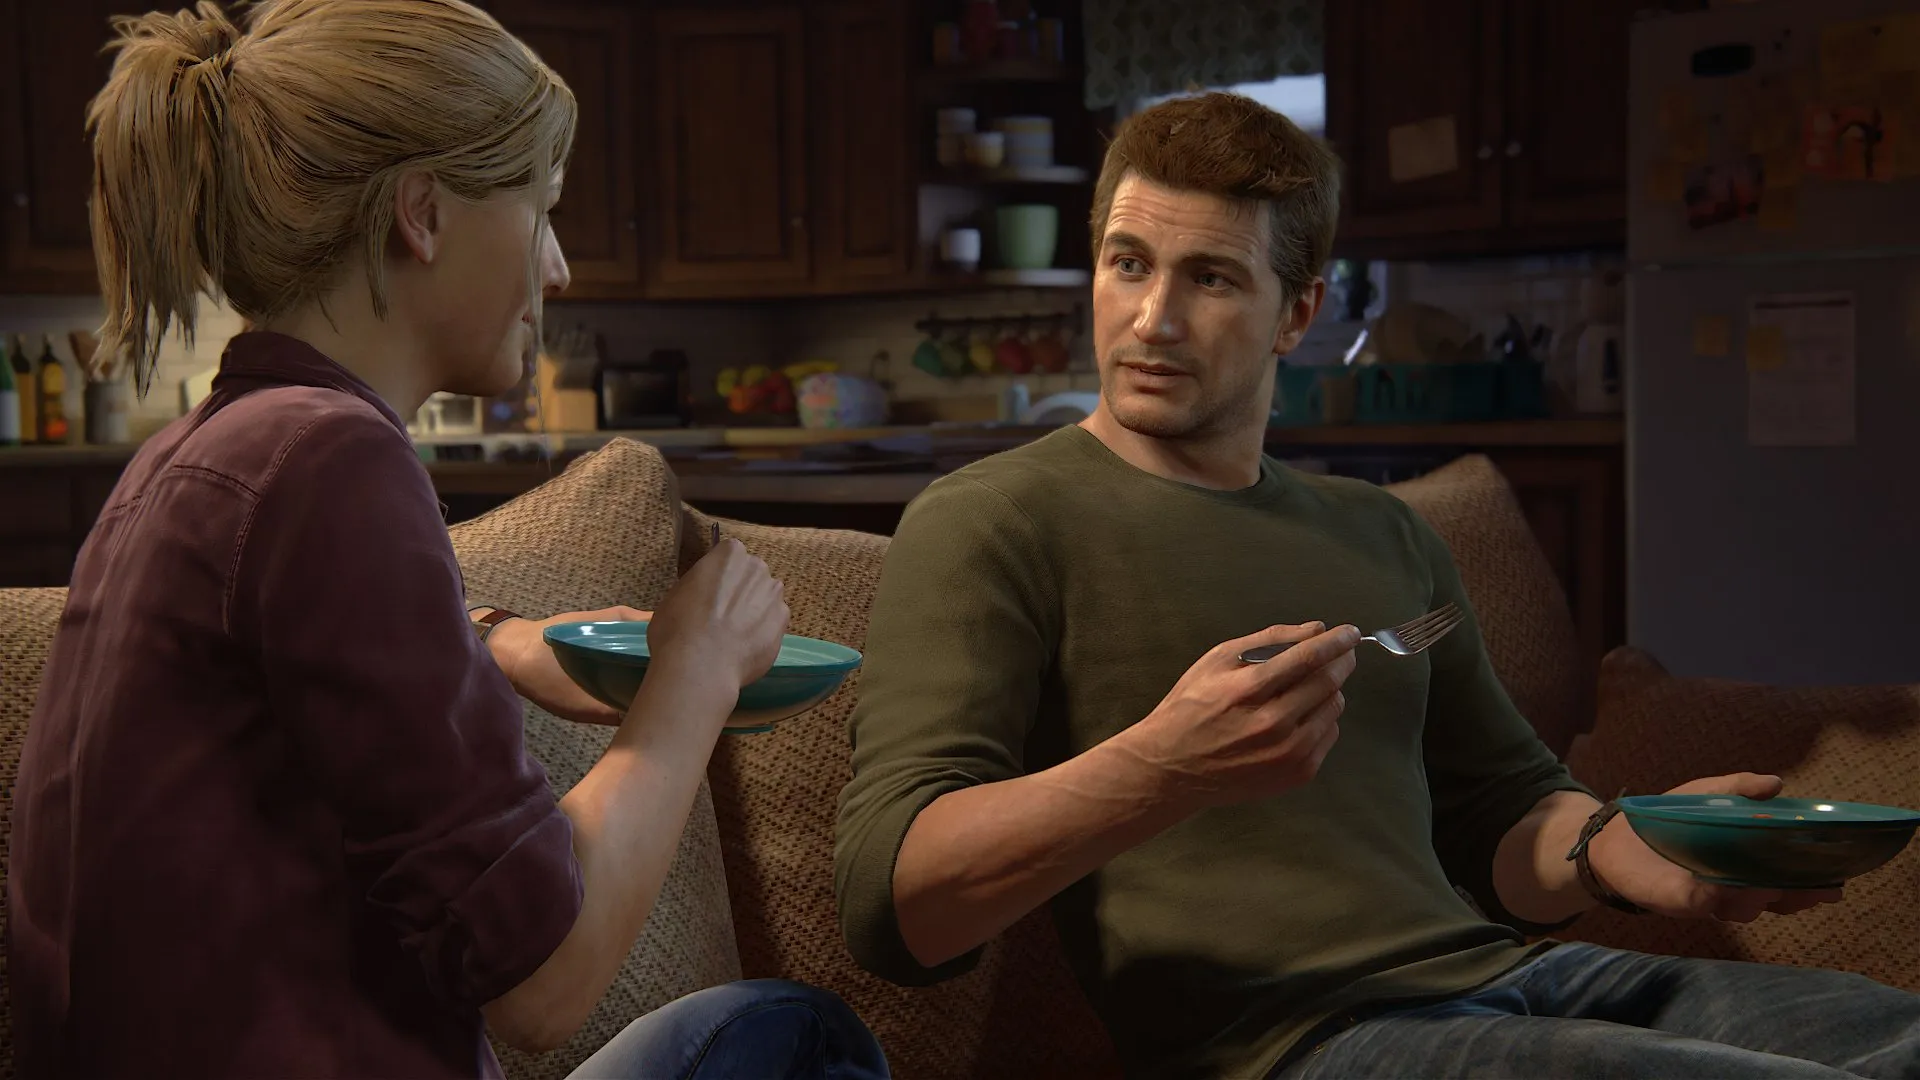 Resenha: Uncharted 4: A Thief's End